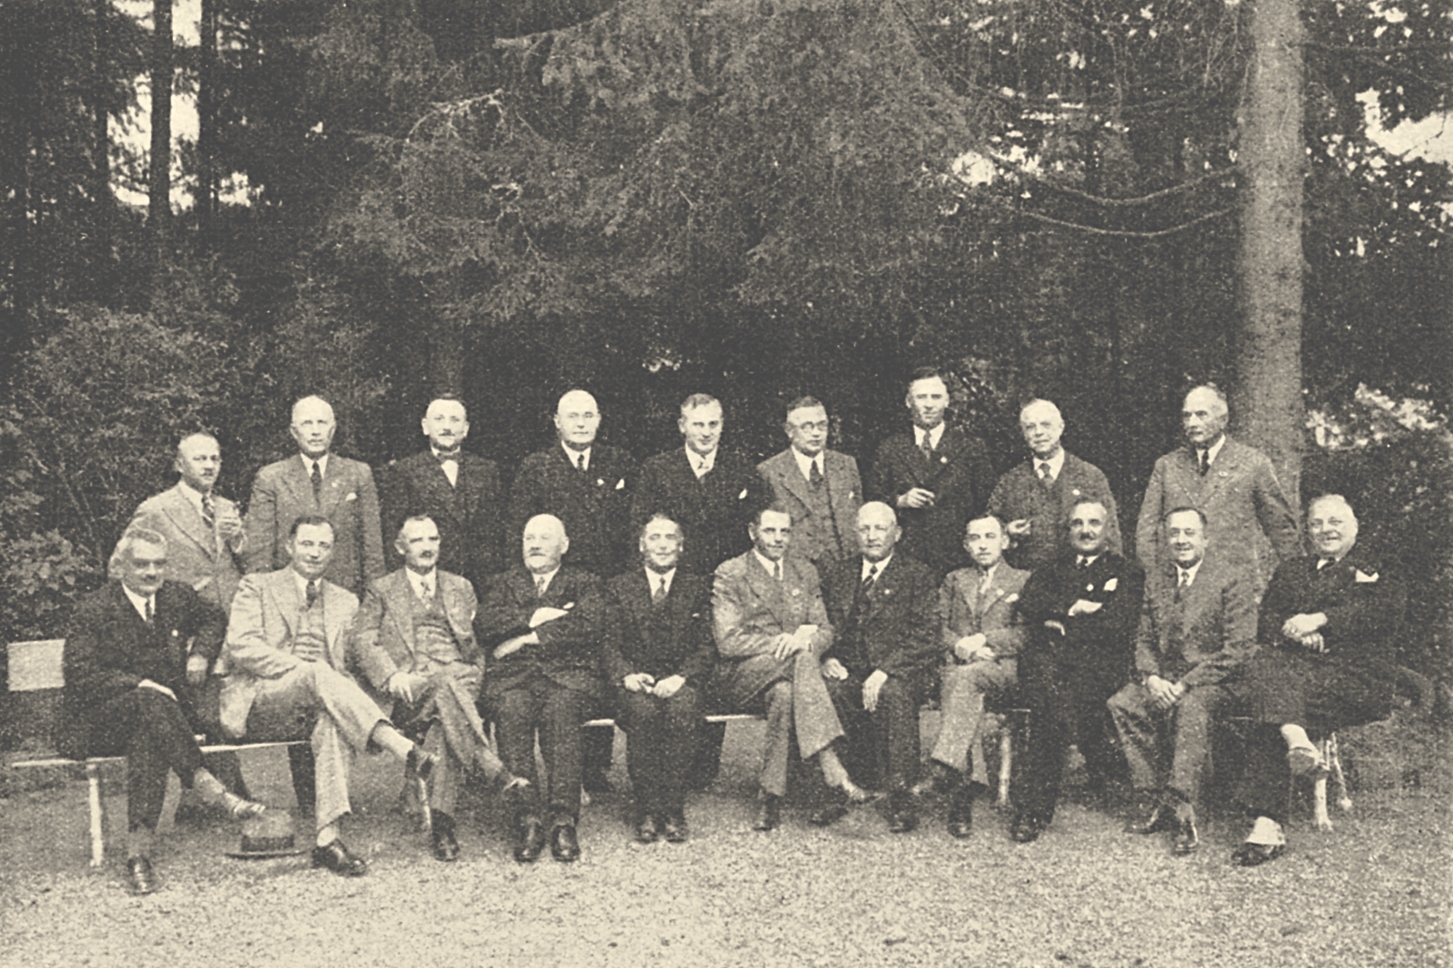 Martin Lachmann in a group photo of successful insurance agents in 1933.